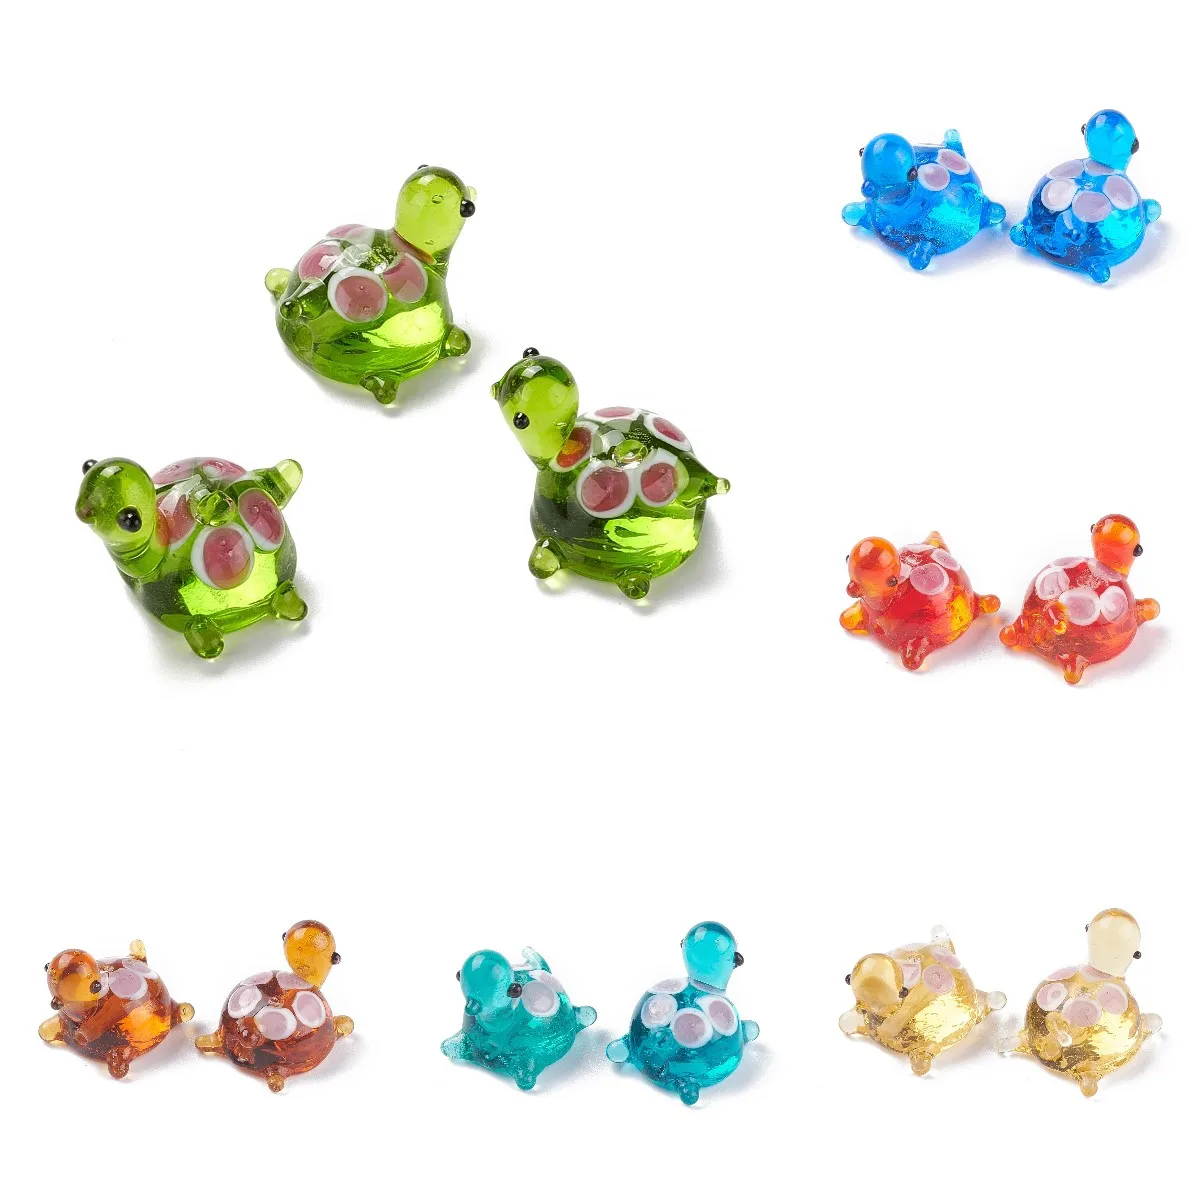 

5Pcs Handmade Lampwork 3D Murano Turtle Beads Glass Animal Spacer Charms Pendant For Necklace Bracelet DIY Jewelry Making